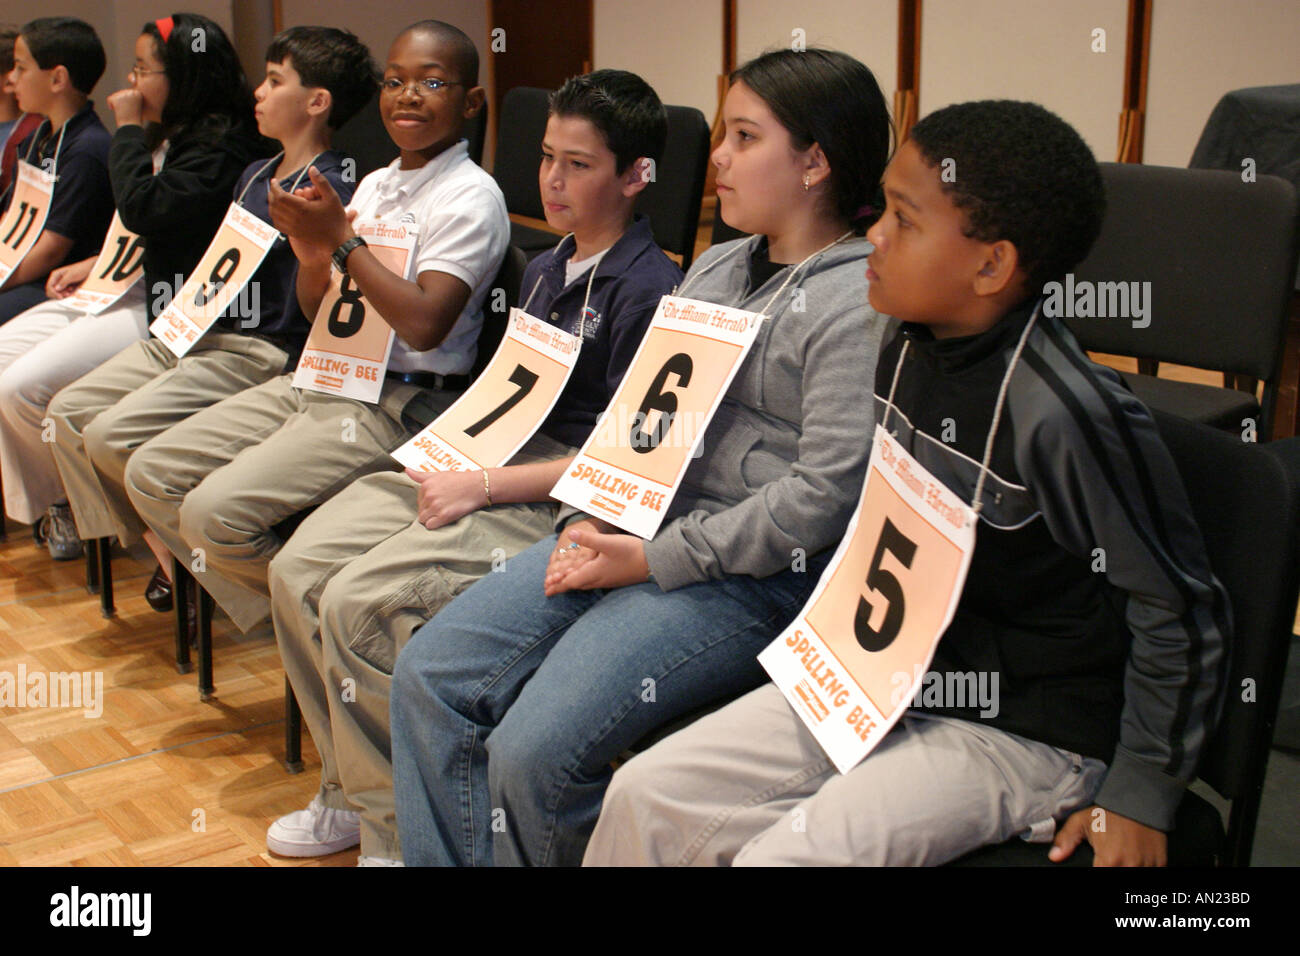 Miami Florida,Miami Dade Monroe County Spelling Bee,event,competition,student students education pupil pupils,challenge,Florida International Universi Stock Photo